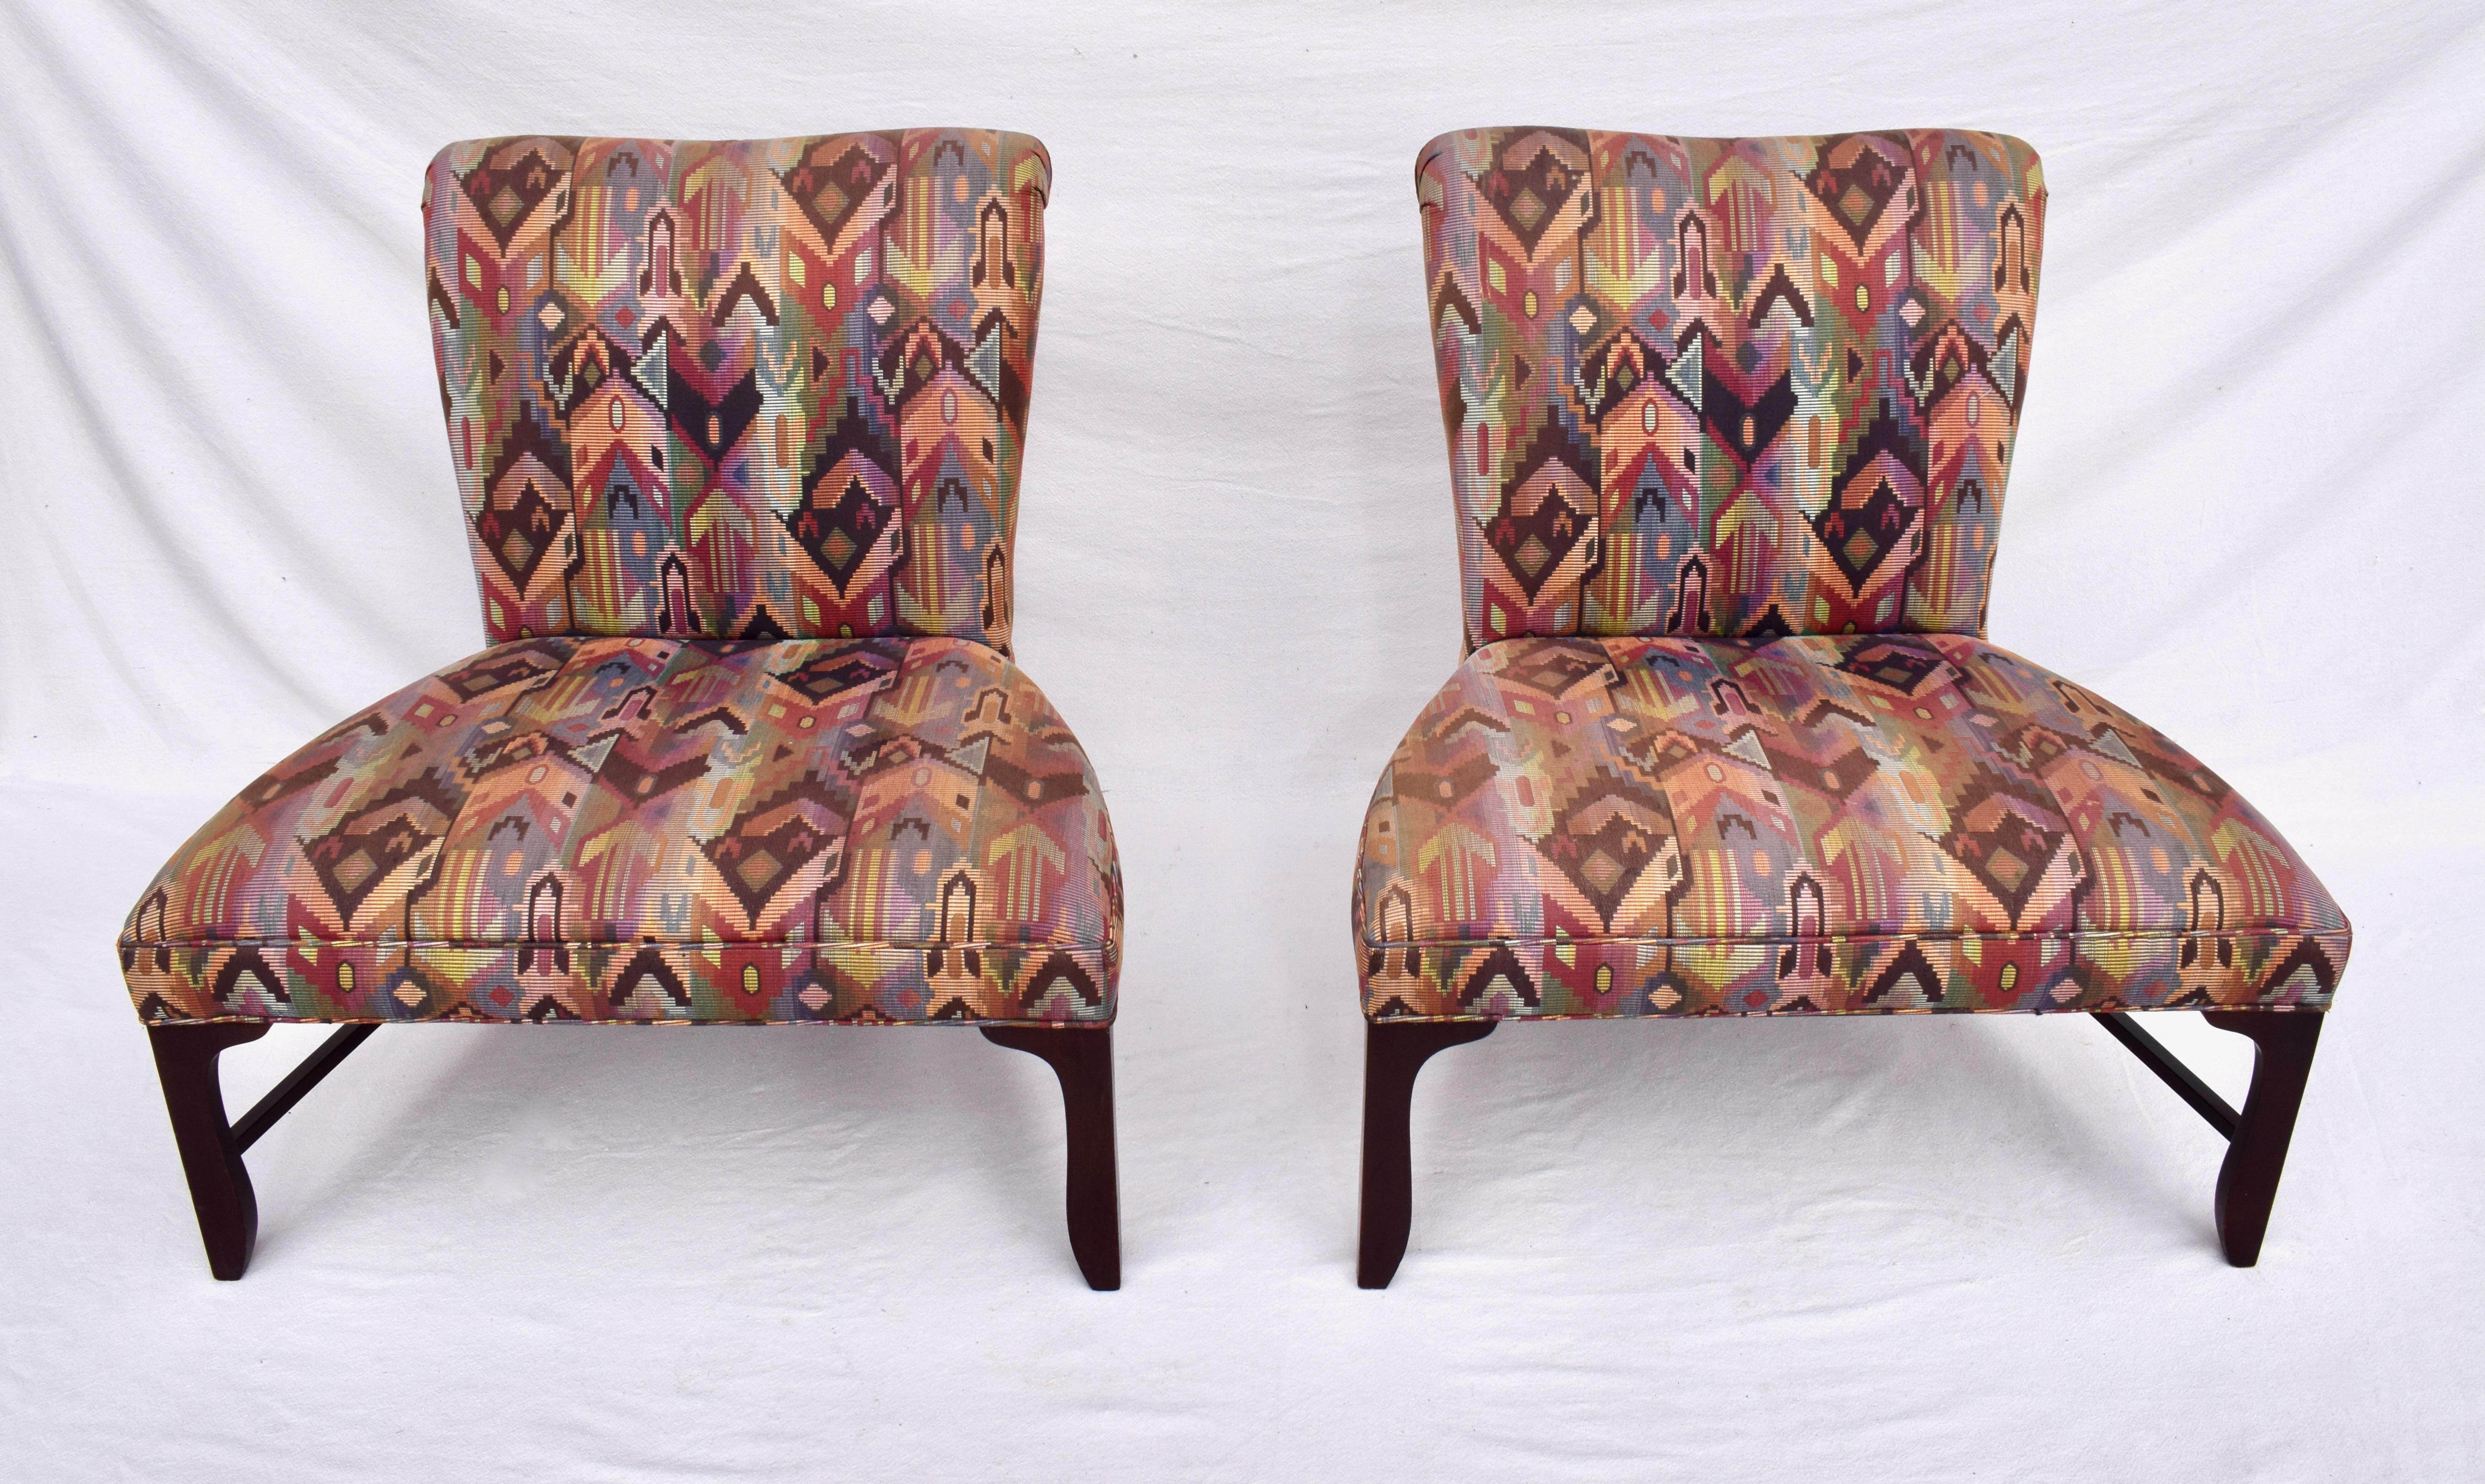 A pair of Mid-Century Modern oversized slipper chairs by Baker Furniture. The chairs feature mahogany legs & stretchers with subtle elegant curves and original Southwestern tapestry style upholstery. In nicely maintained all original condition, the